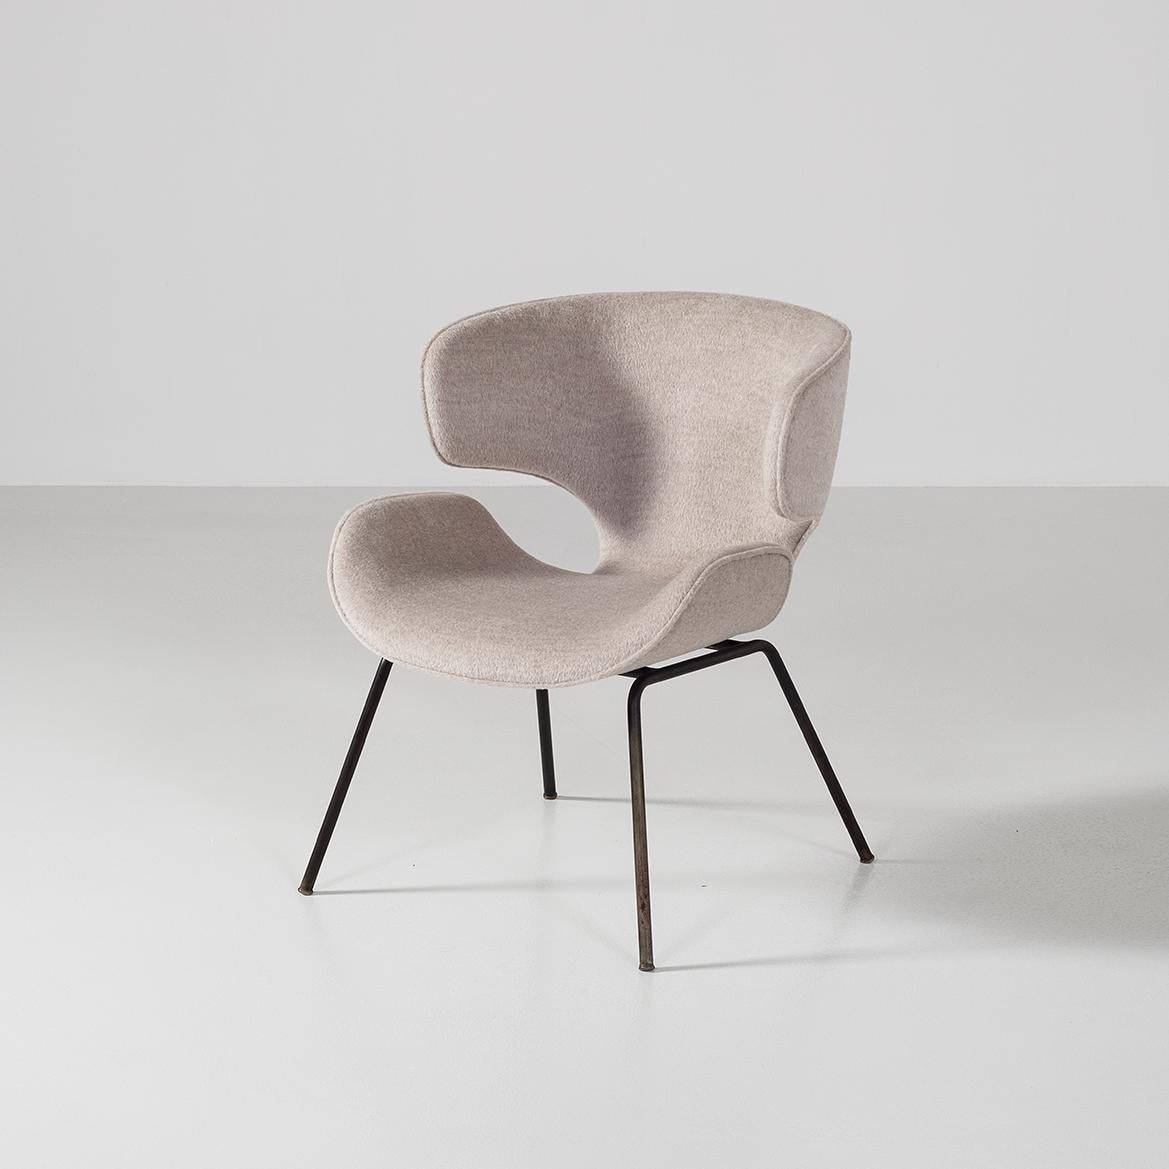 Designed by Kenmochi Design Associates in 1965
Manufactured by Tendo Mokko, Japan
Material: stainless steel round pipe and new upholstering with Loro Piana cashmere
Dimensions: L56 P752 H71 cm

The S-5007AA-AA chair was created by Isamu Kenmochi,